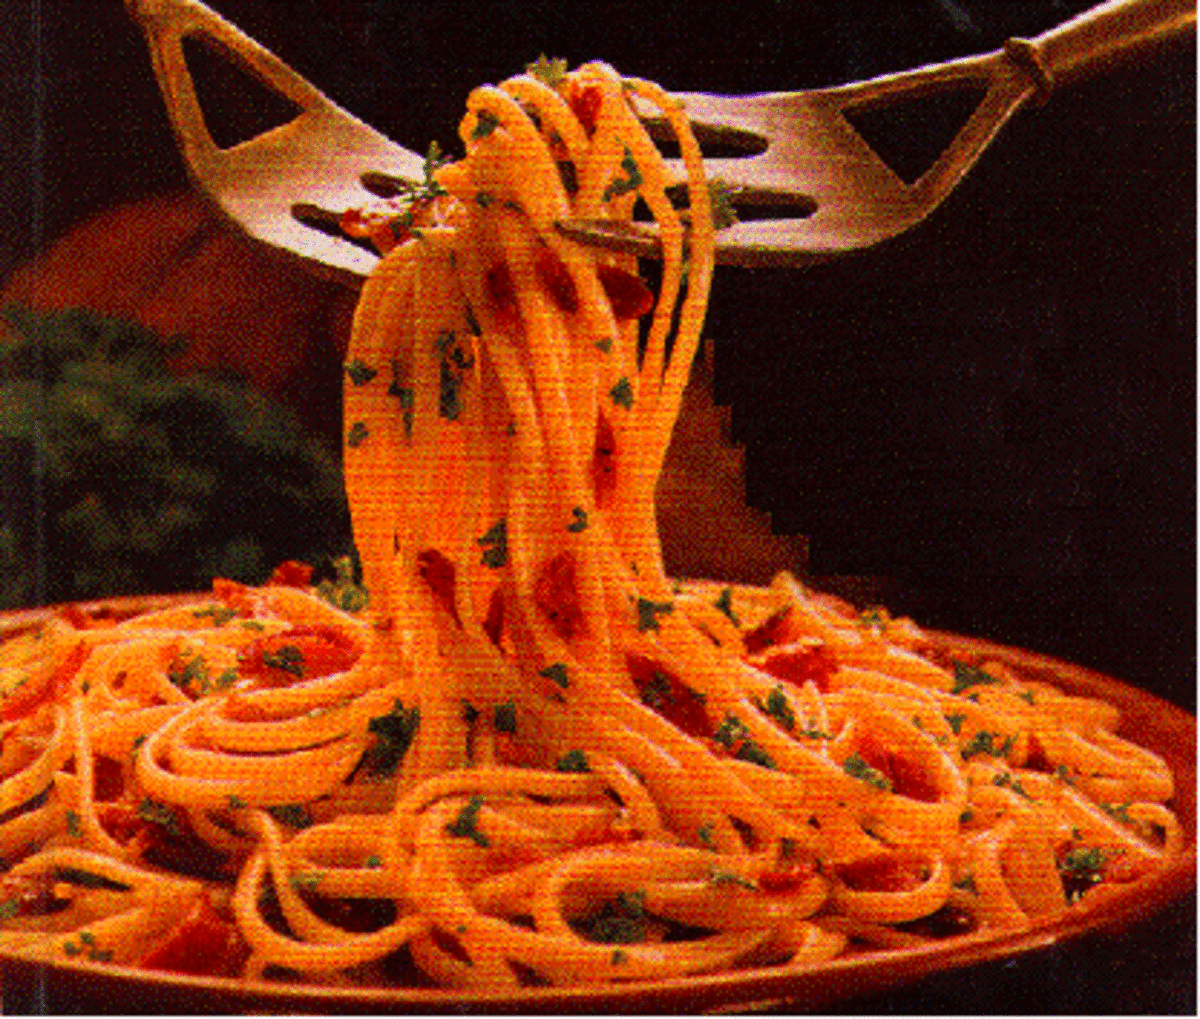 Measuring a serving size of pasta